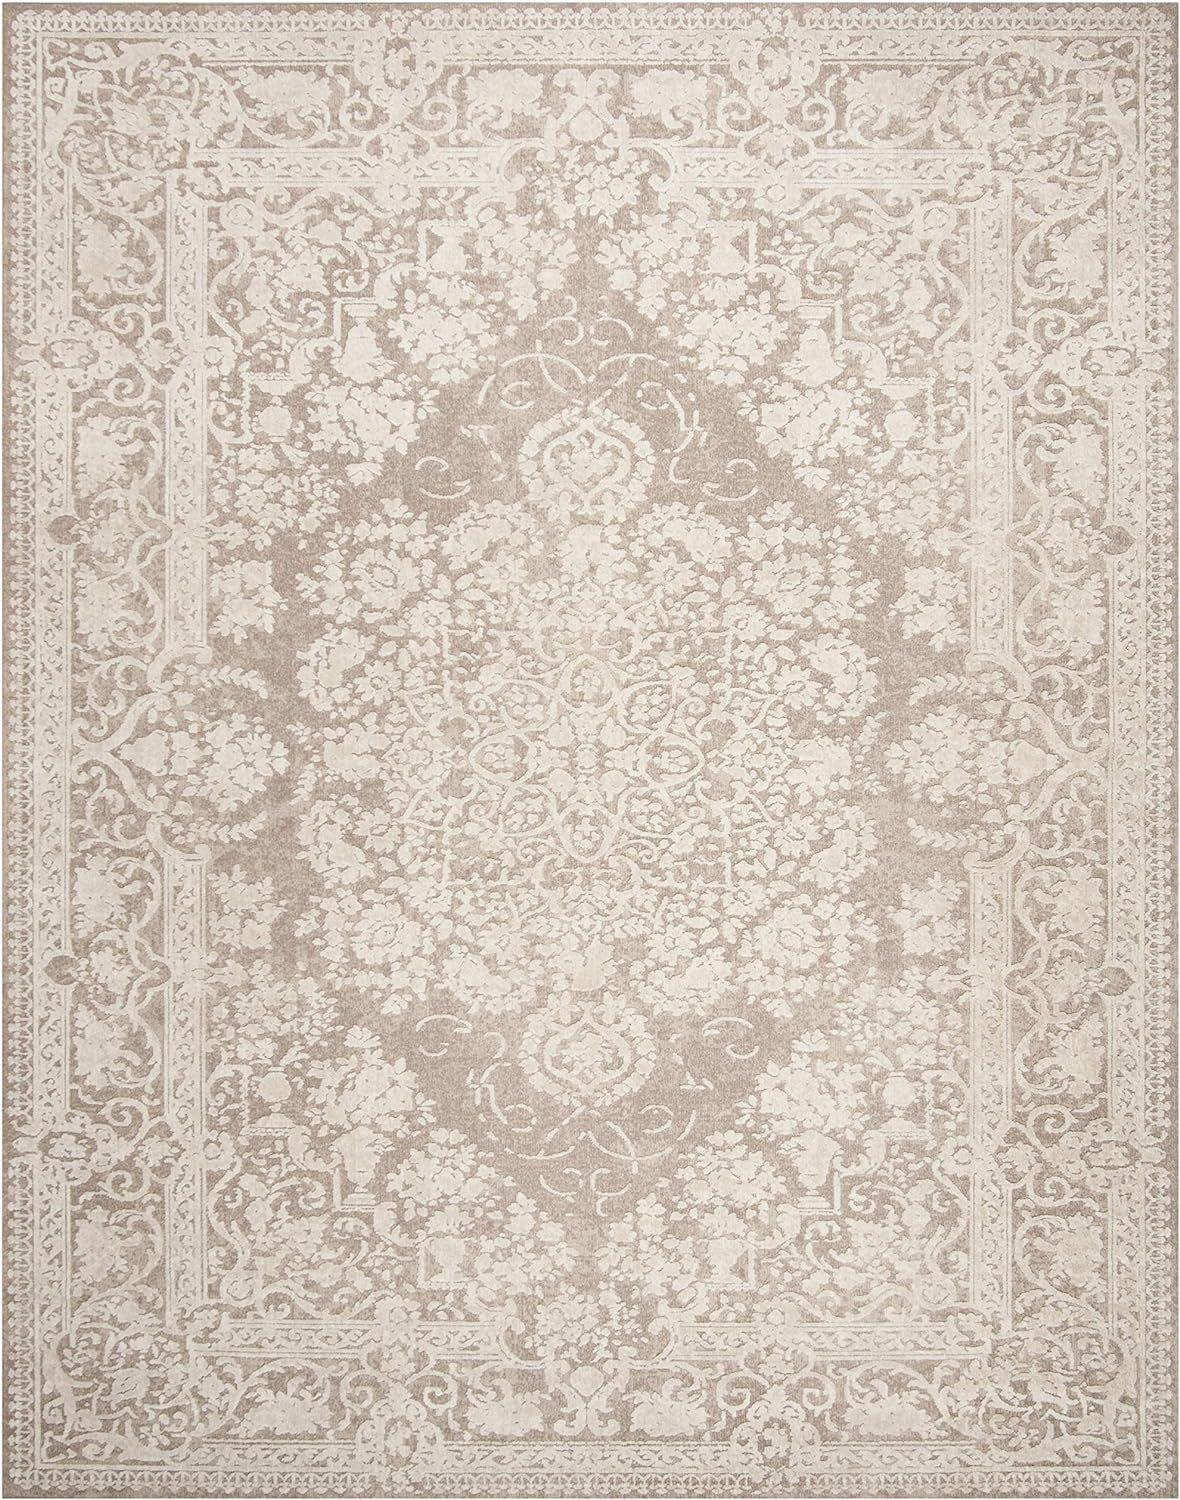 SAFAVIEH Reflection Collection 8' x 10' Beige/Cream RFT664A Vintage Distressed Area Rug | Amazon (US)